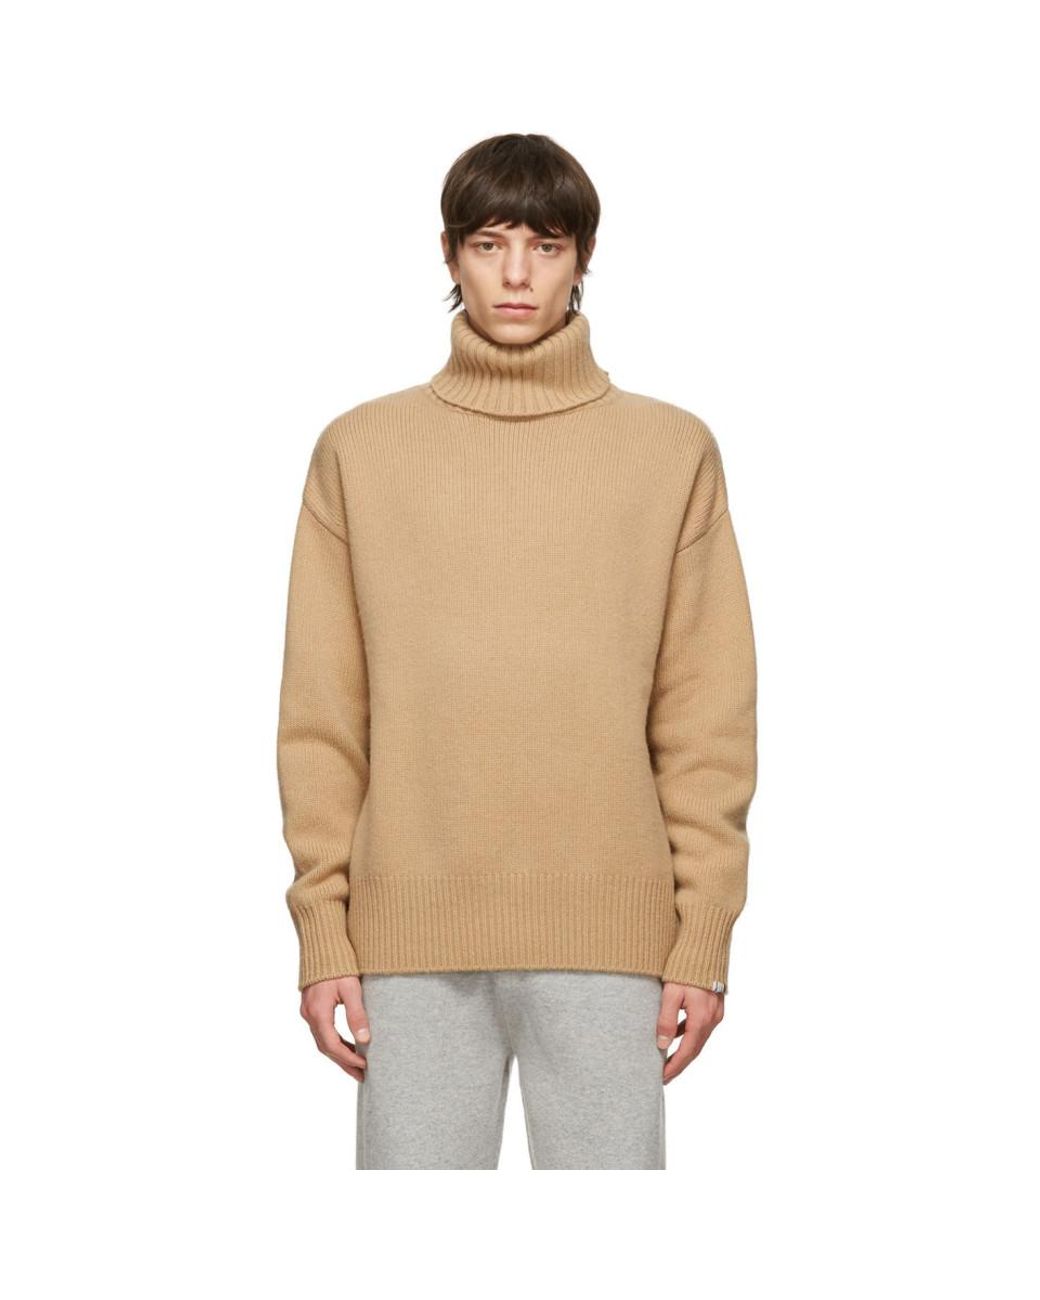 Extreme Cashmere Cashmere Tan N°20 Oversize Xtra Turtleneck in Camel ...